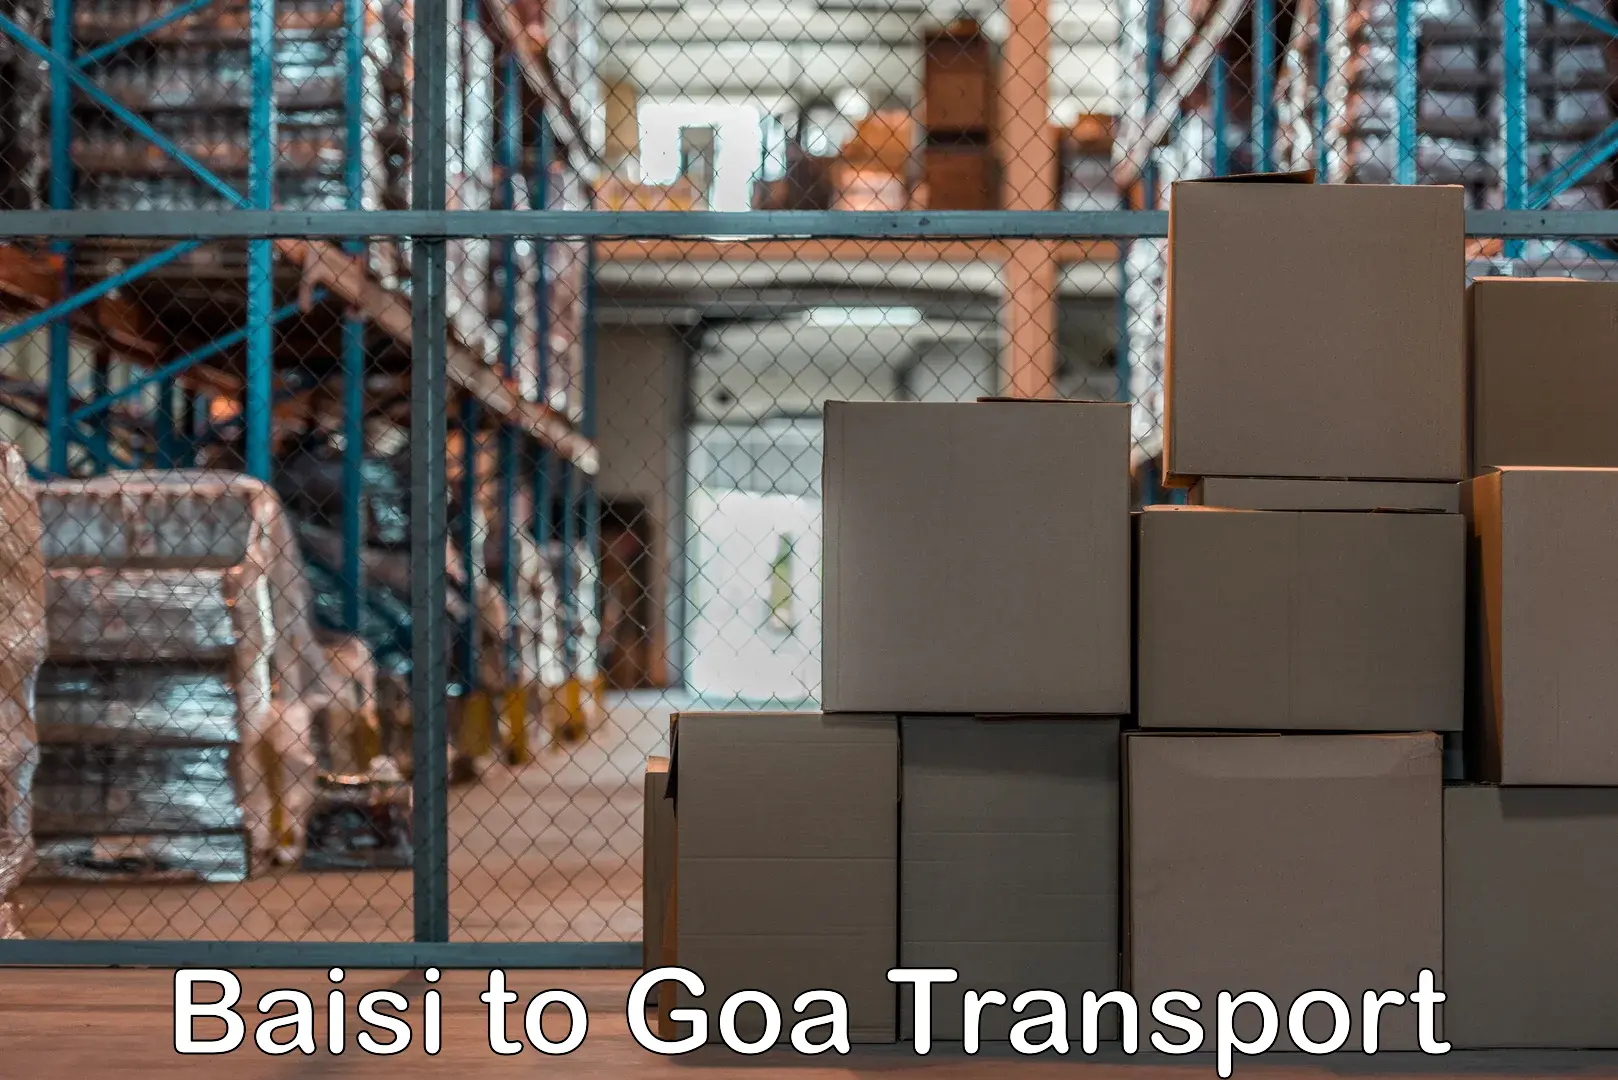 Transport in sharing in Baisi to Goa